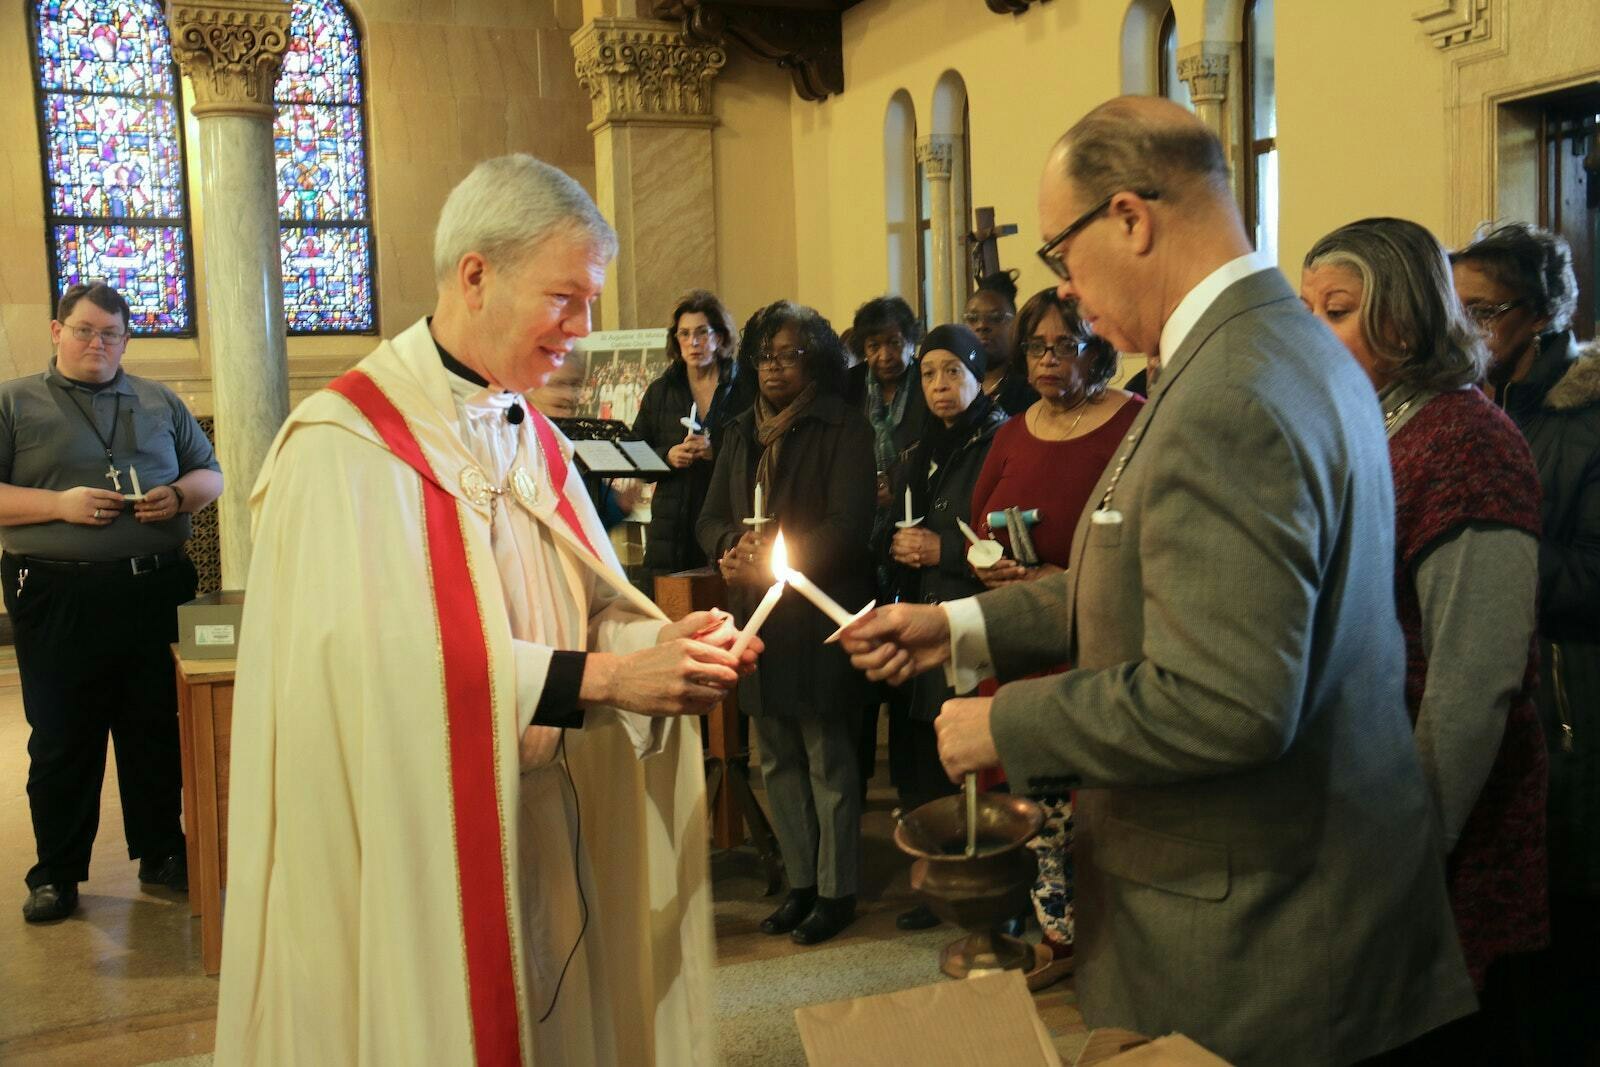 Msgr. Trapp lights a candle before the Candlemas procession at St. Augustine and St. Monica Parish in February 2019. The parish hosted the first of four talks in the Disciples of Mission speaker series, a cooperative mission between Sacred Heart Major Seminary and the Archdiocese of Detroit's Office of Black Catholic Ministry. (Daniel Meloy | Detroit Catholic)